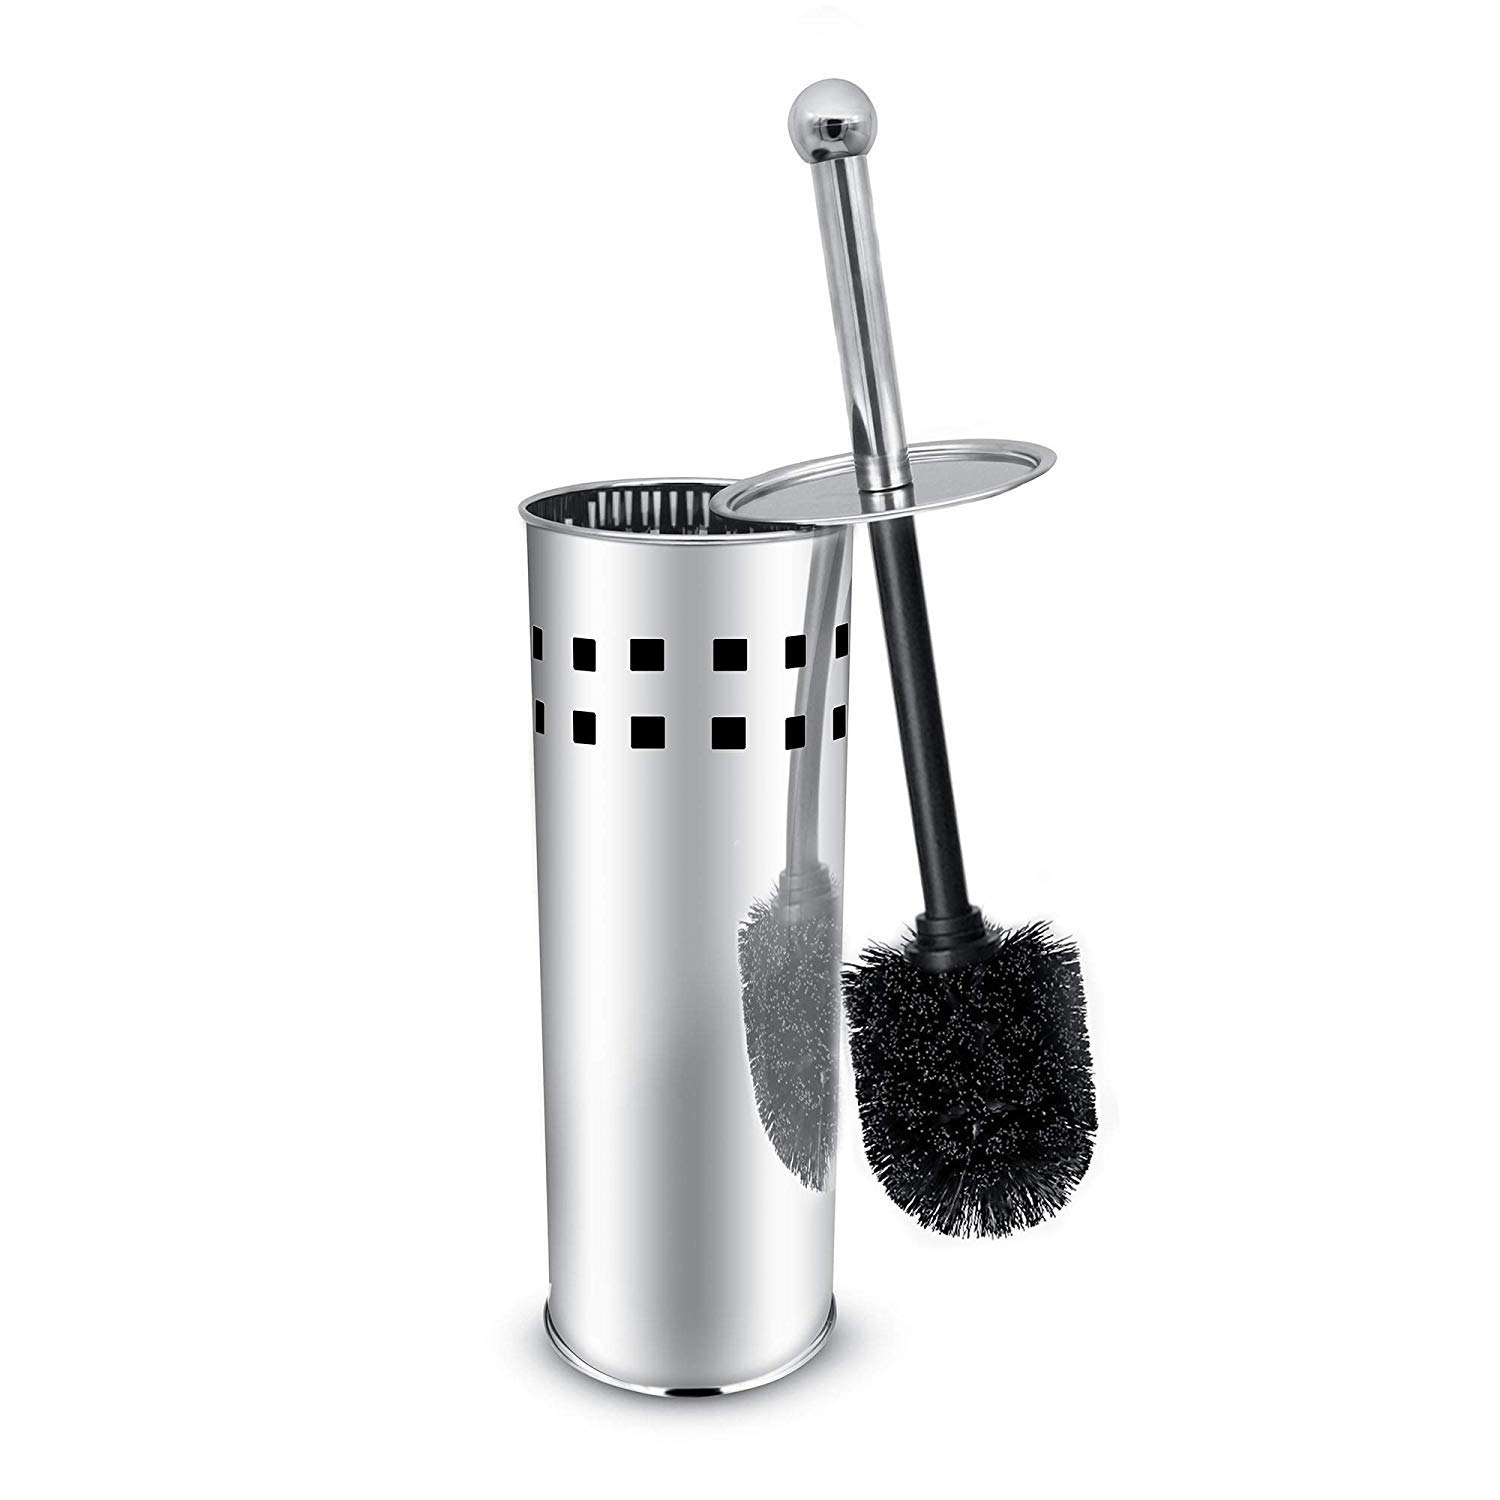 Book Cover GiniHome Toilet Brush and Holder, 304 Bamboo Charcoal Stainless Steel Toilet Brush for Bathroom Storage and Organization - Space Saving, Sturdy, Toilet Cleaner, Odor Free-Black